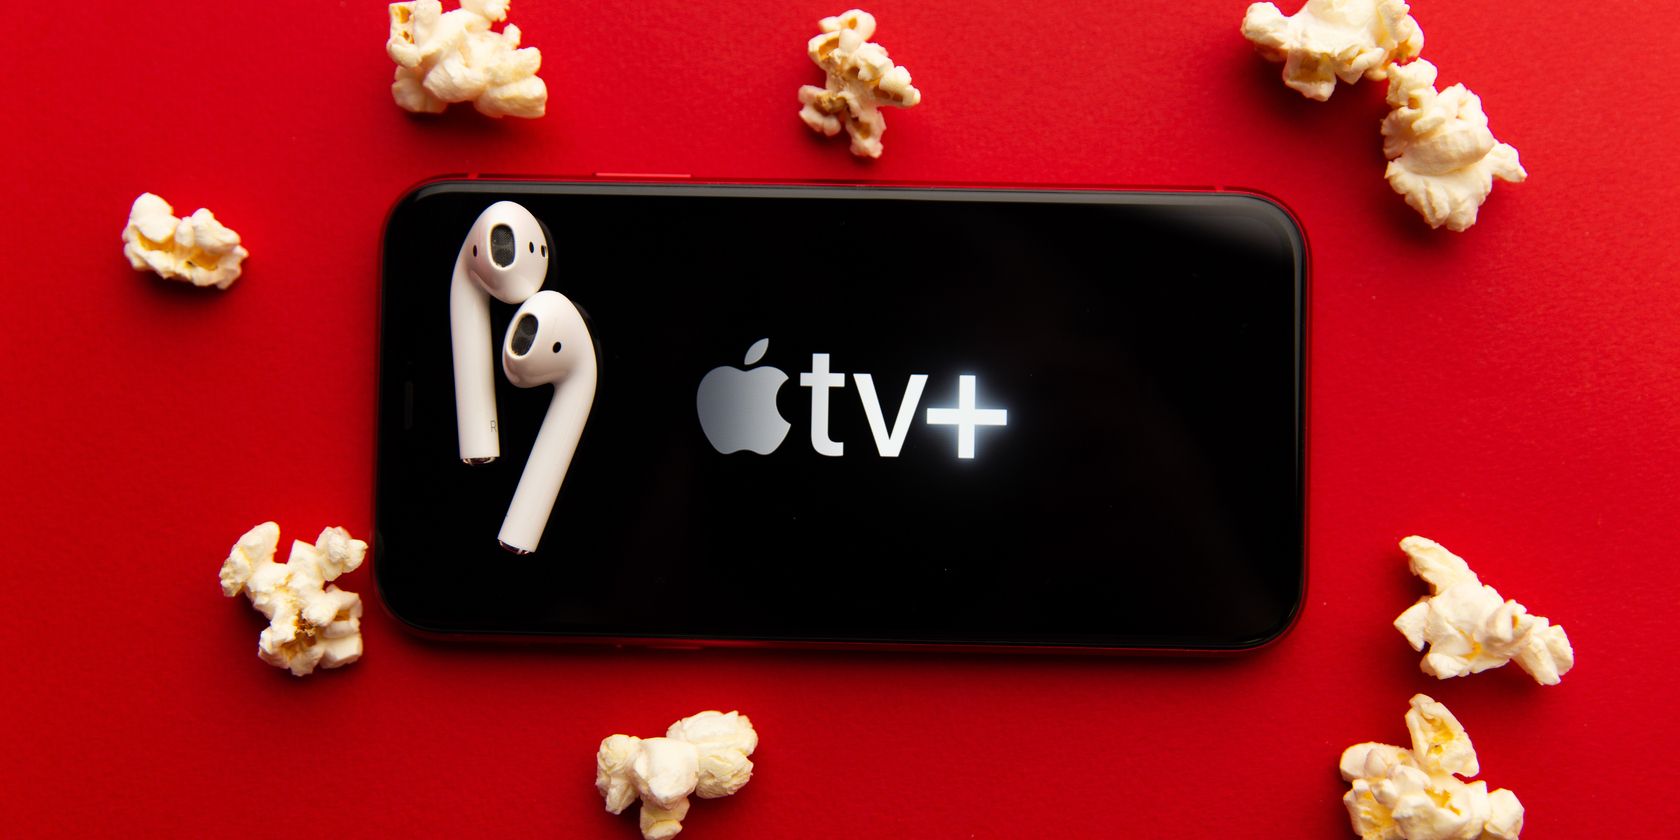 apple tv+ logo on mobile screen with popcorn and earbuds surrounding